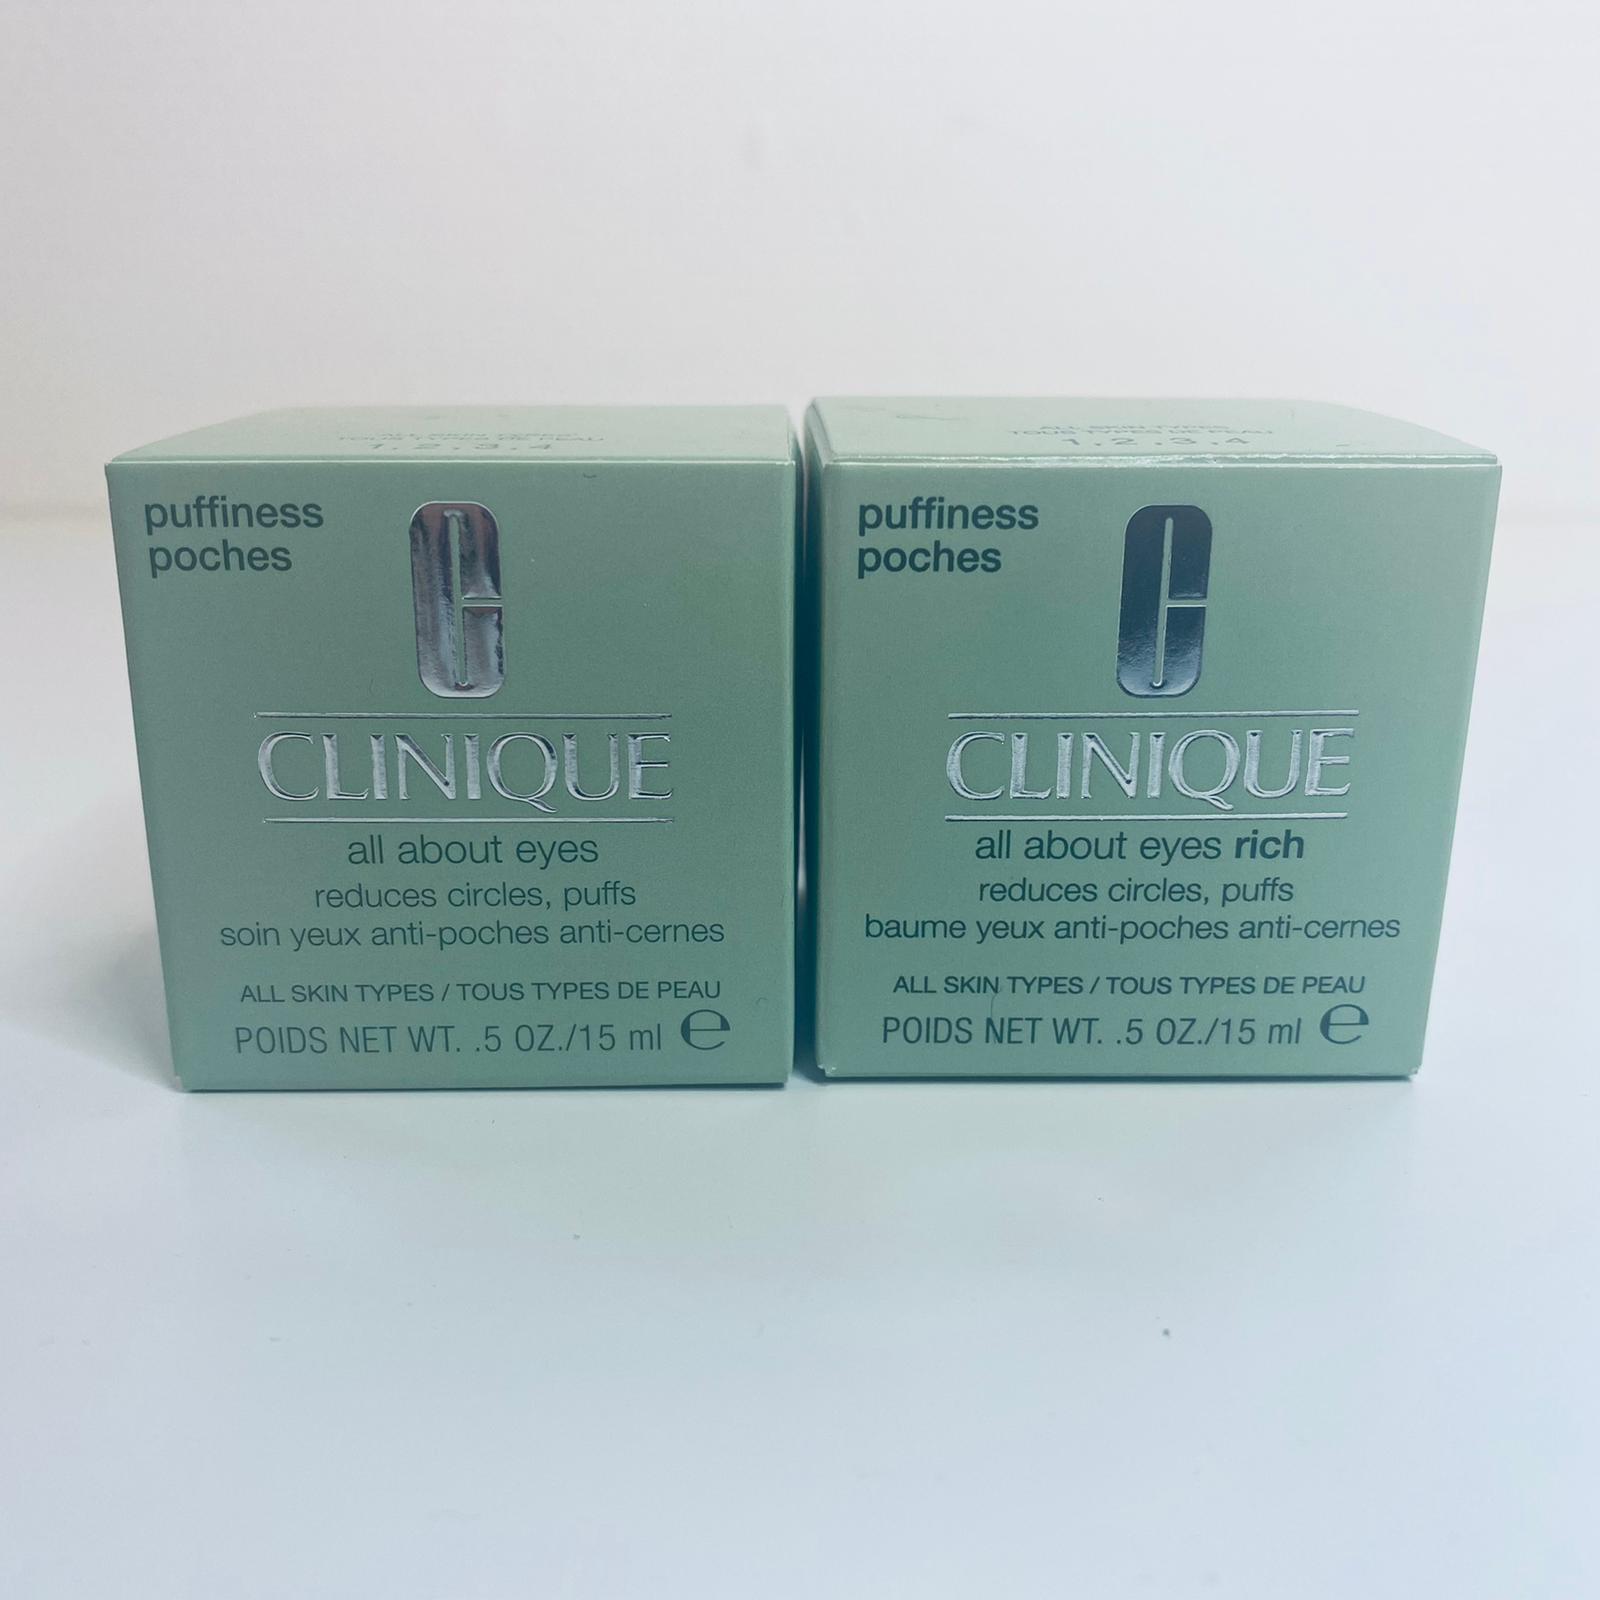 Clinique all about eyes rich. Reduces circles and puffs. All skin types 15 ml